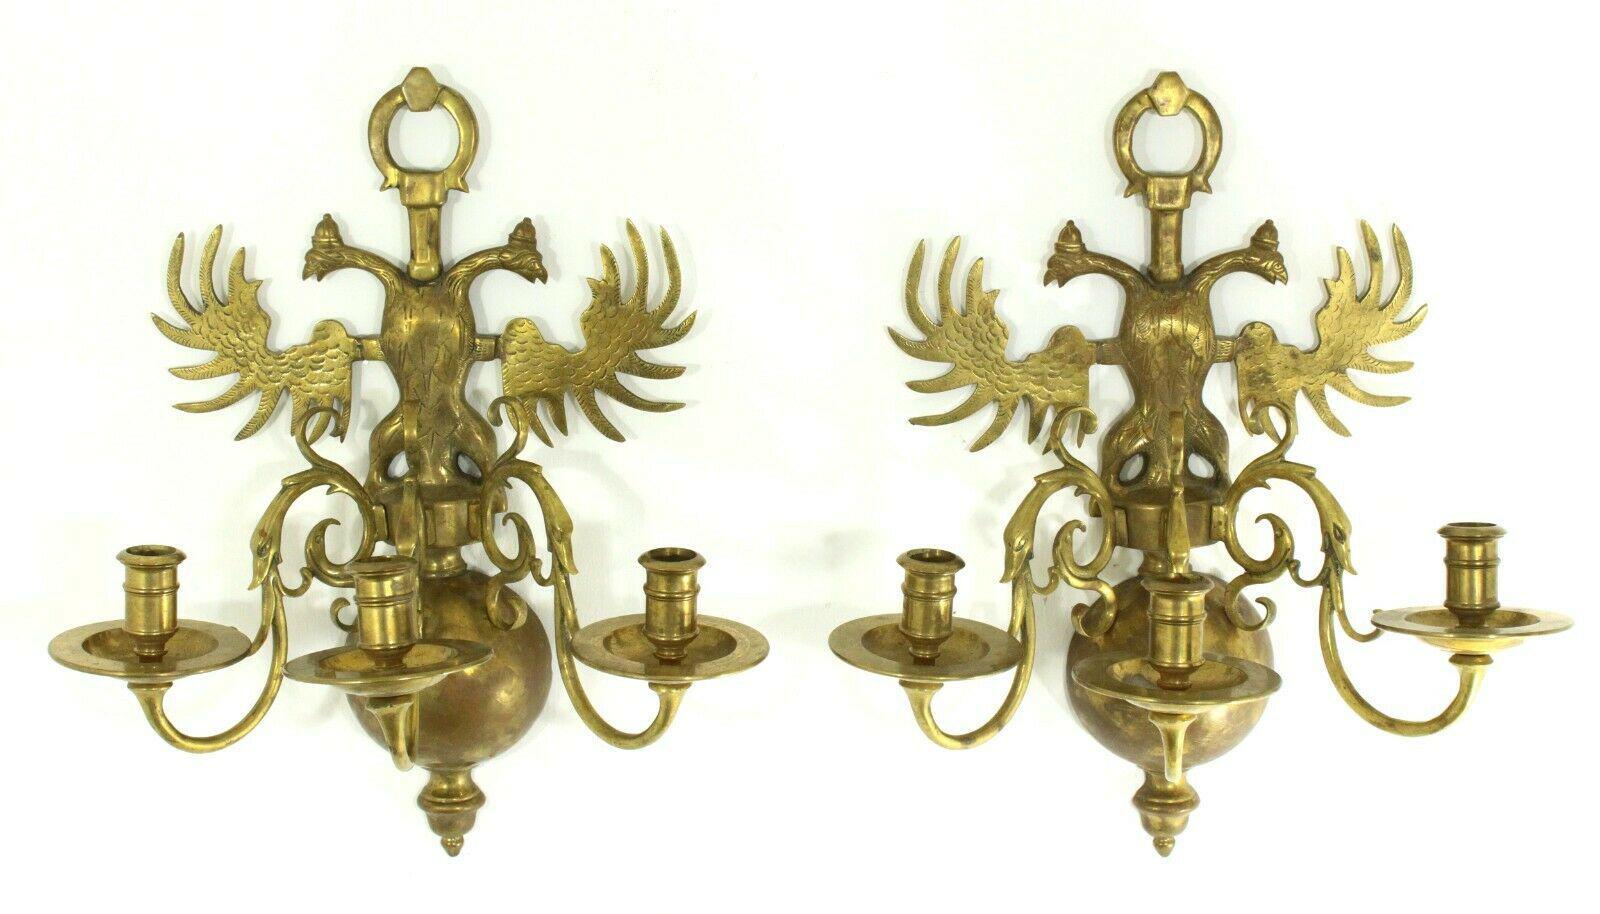 Pair 19thc Russian Imperial/ Period Napoleon III Bronze Eagle Figural Candle Sconces.  I purchased these sconces at an auction in Europe.